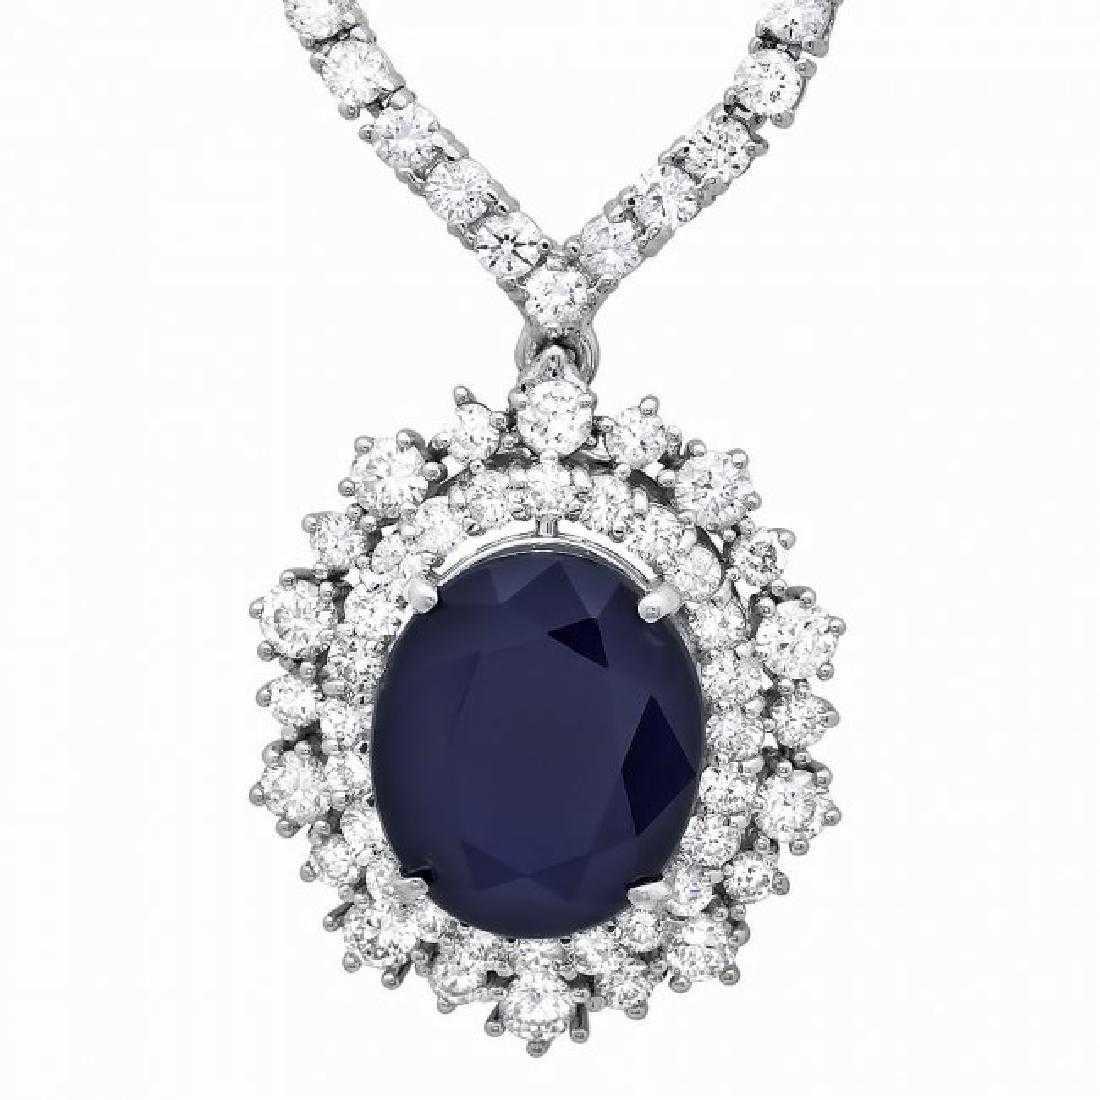 18K White Gold 5.82ct Sapphire and 4.96ct Diamond Necklace